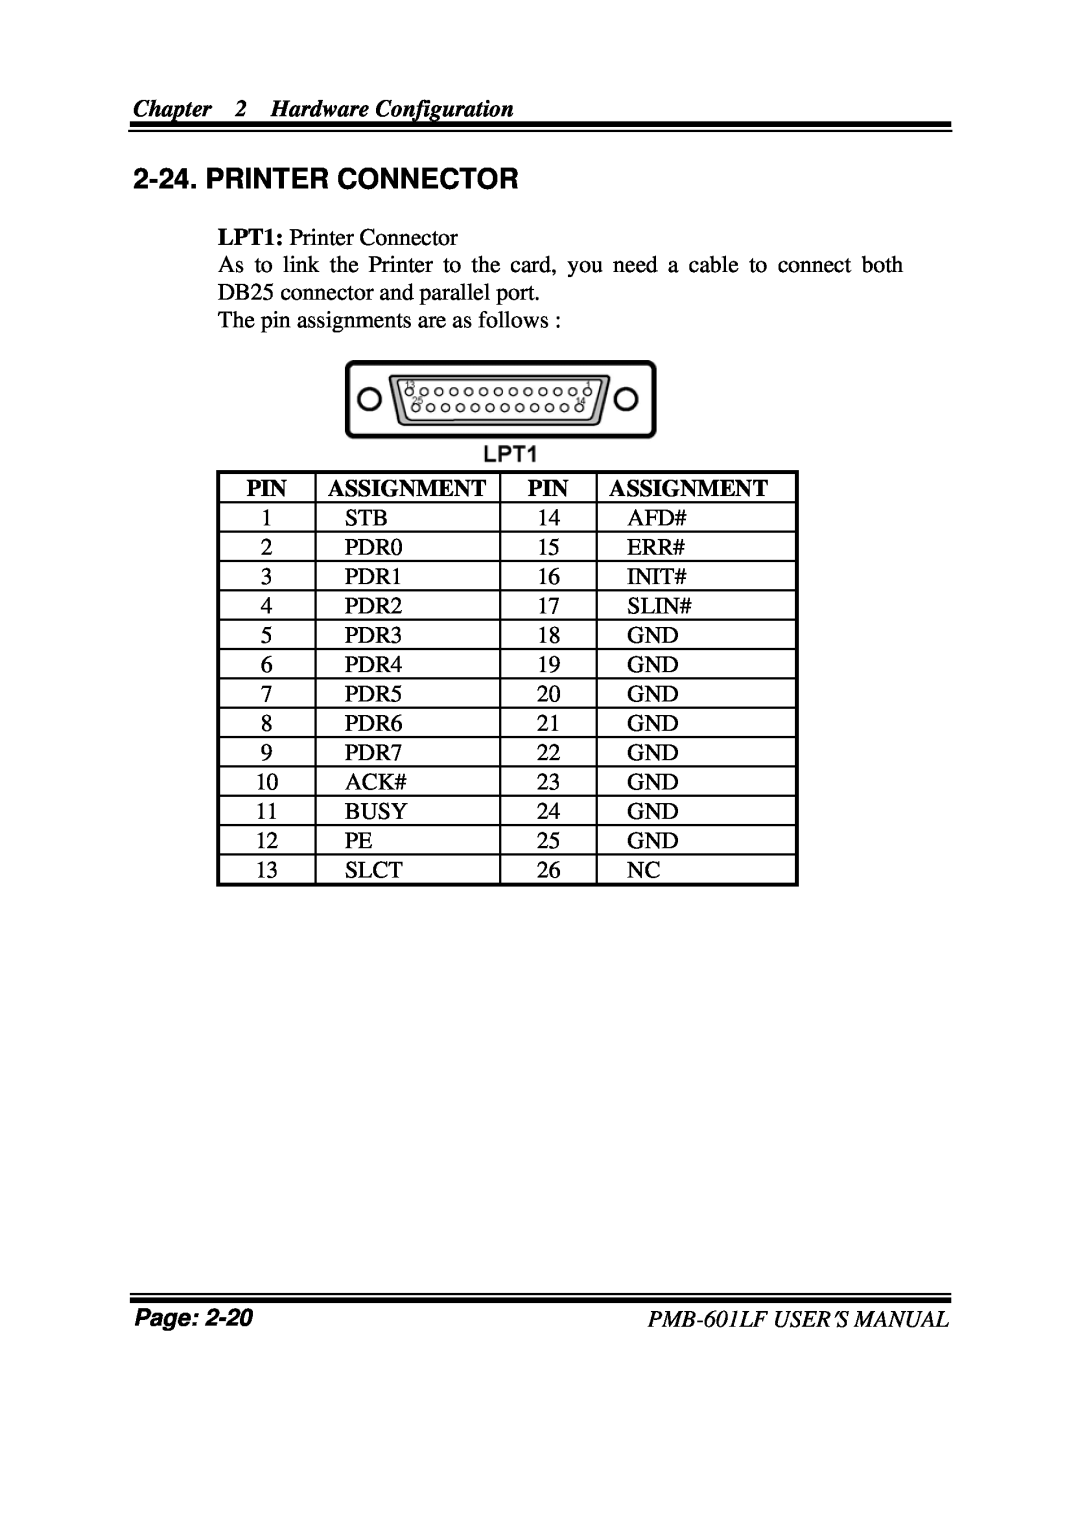 Intel user manual Printer Connector, Hardware Configuration, Assignment, Page, PMB-601LFUSER′S MANUAL 